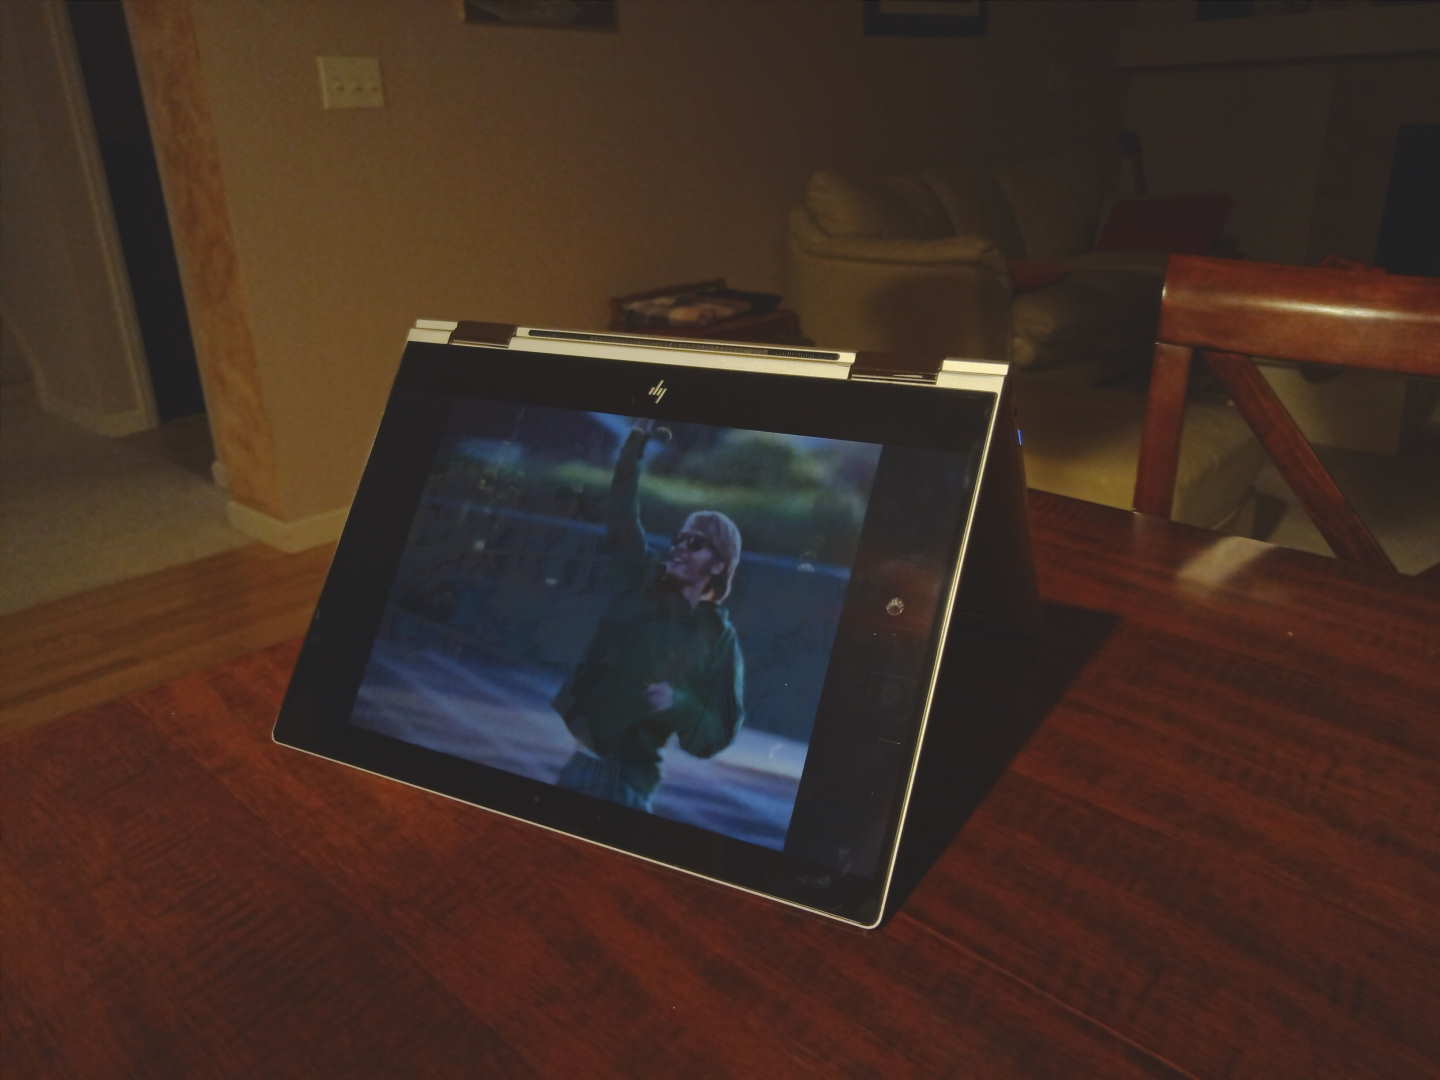 picture of Steve Prefontaine in green shirt with arm raised on screen of an HP Spectre x360 convertible laptop on a wooden table